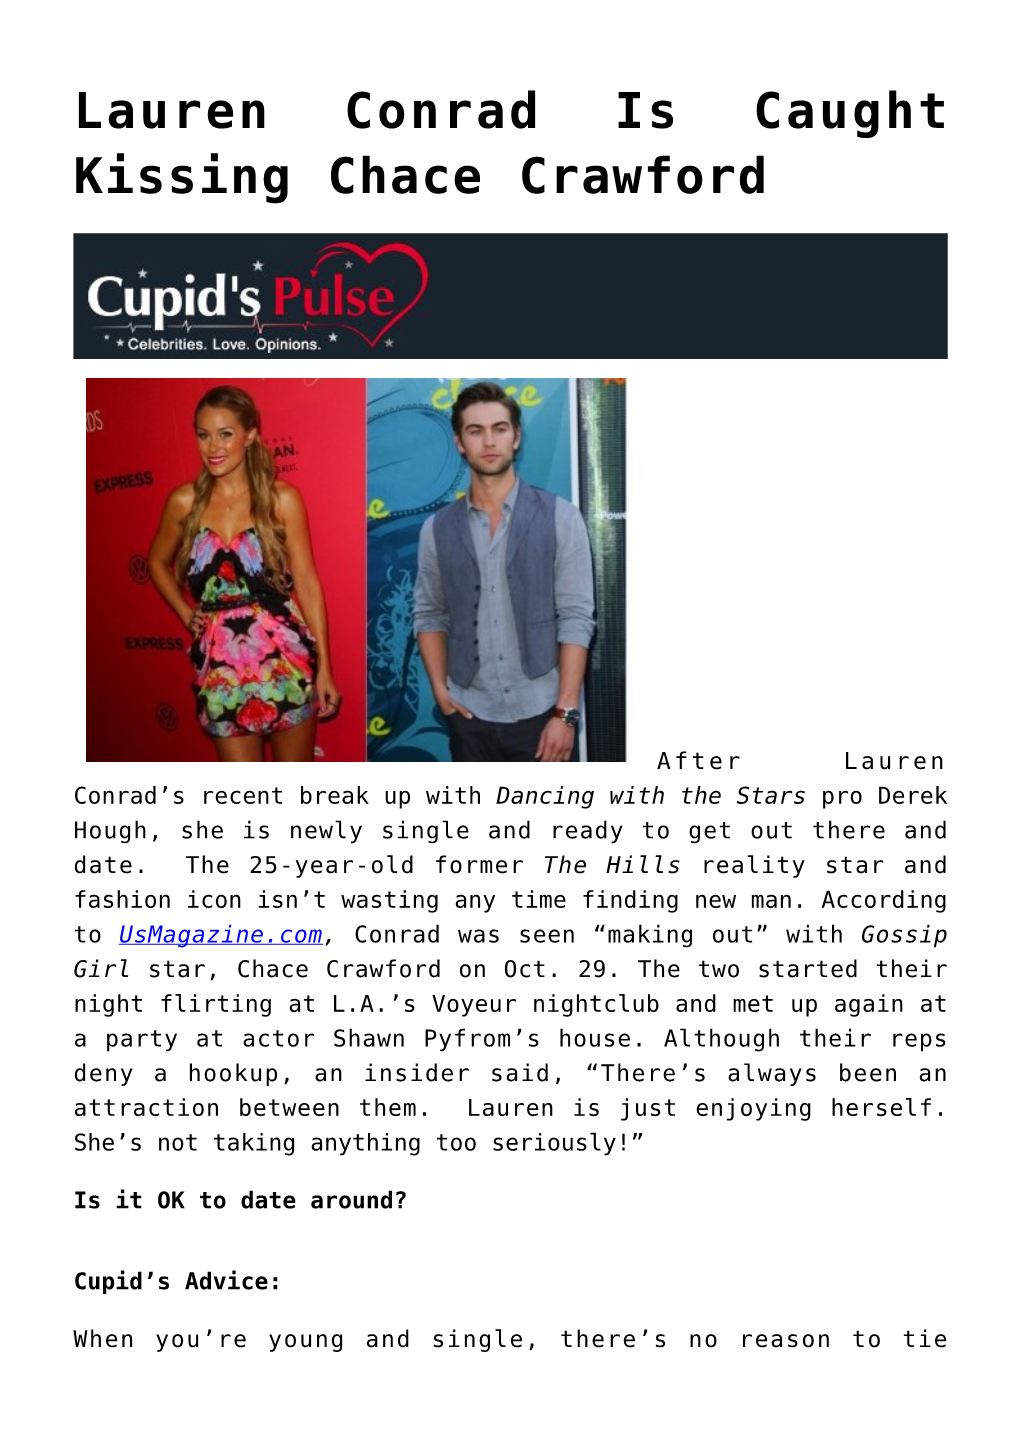 Lauren Conrad Is Caught Kissing Chace Crawford